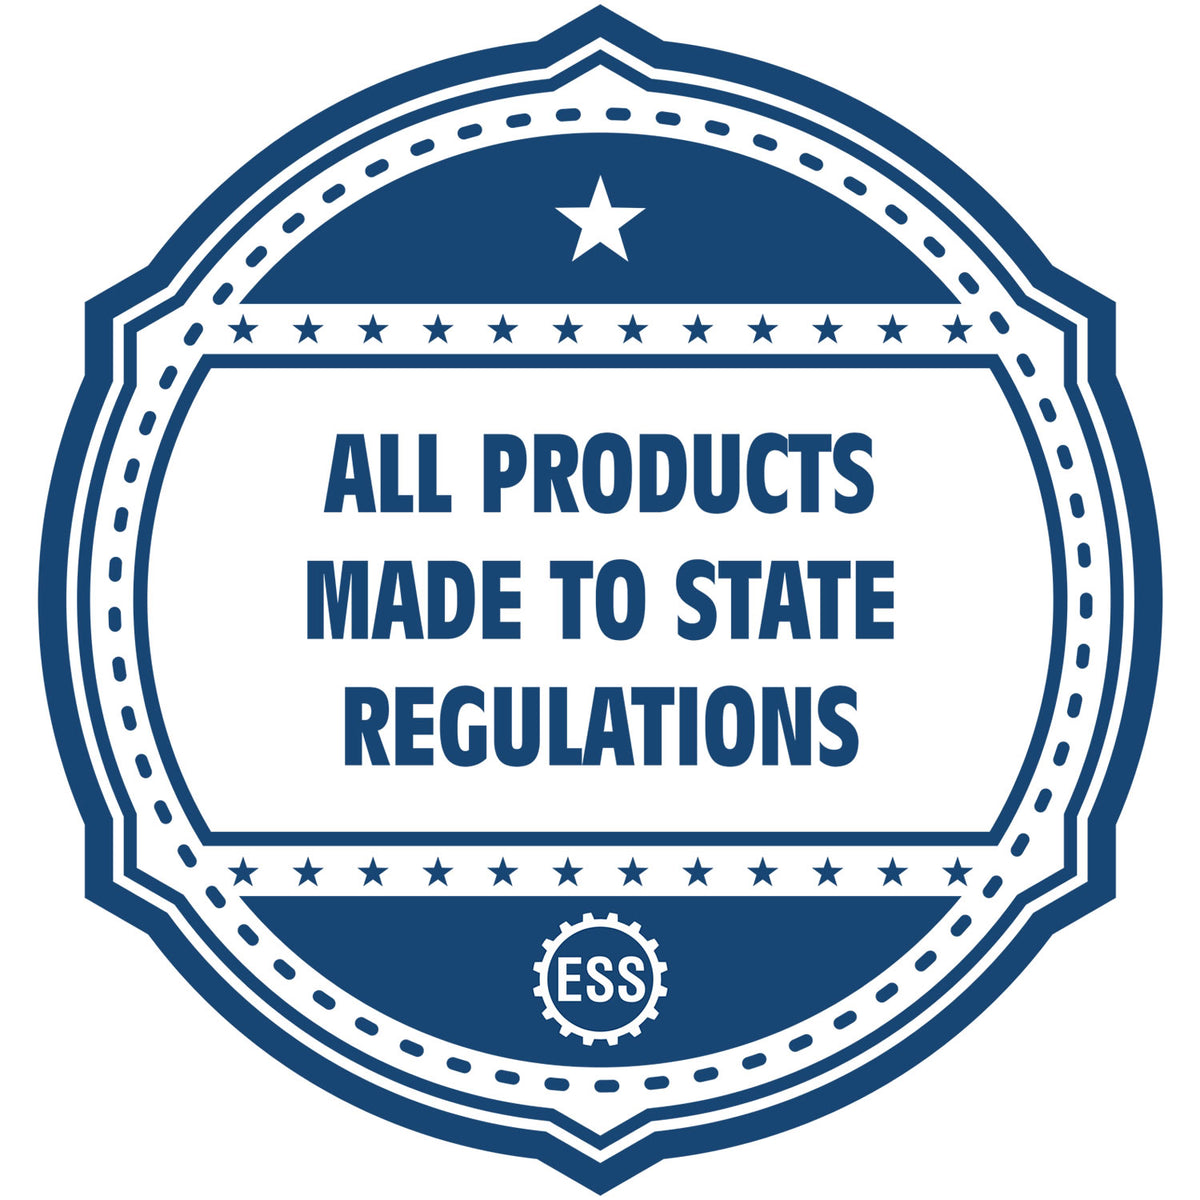 An icon or badge element for the Slim Pre-Inked Rectangular Notary Stamp for Illinois showing that this product is made in compliance with state regulations.